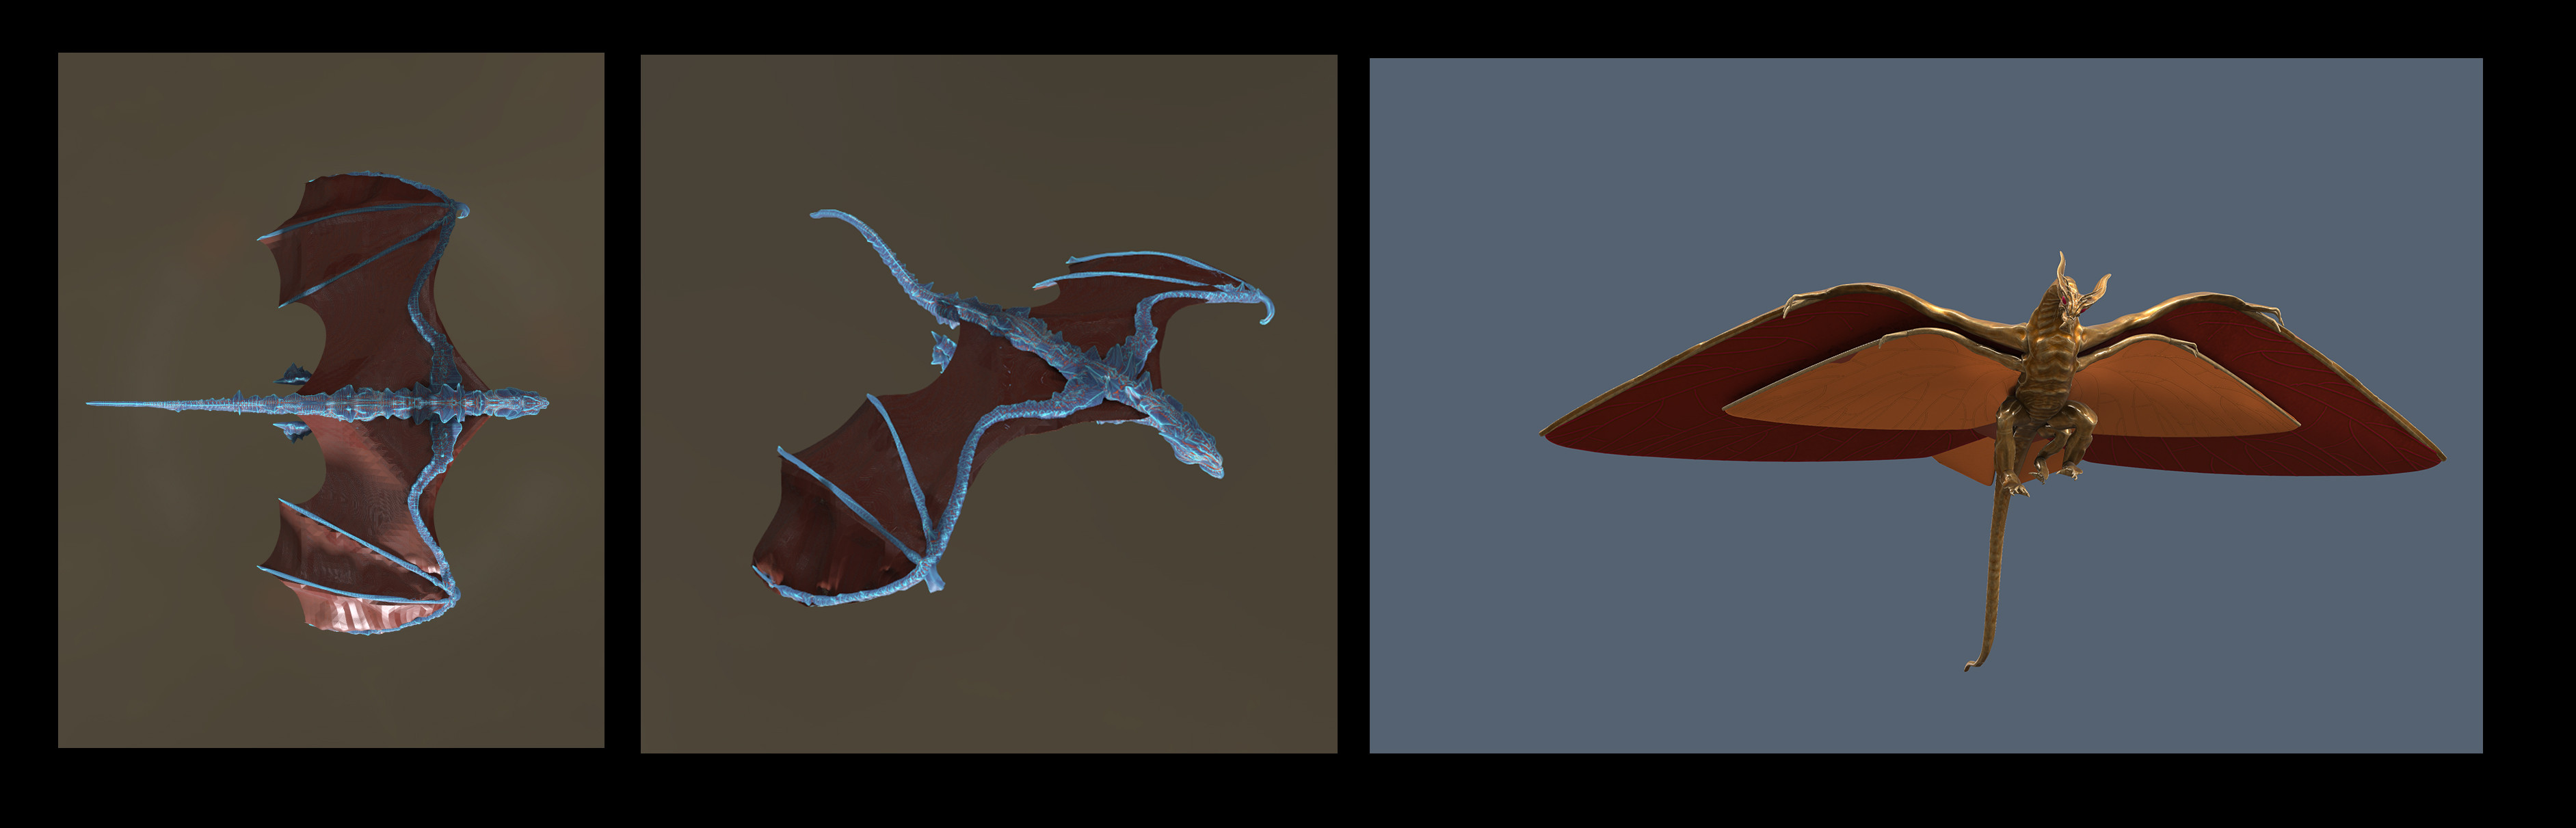 Some WIP sculpts and alternate colors, I considered doing more batlike wings at one point